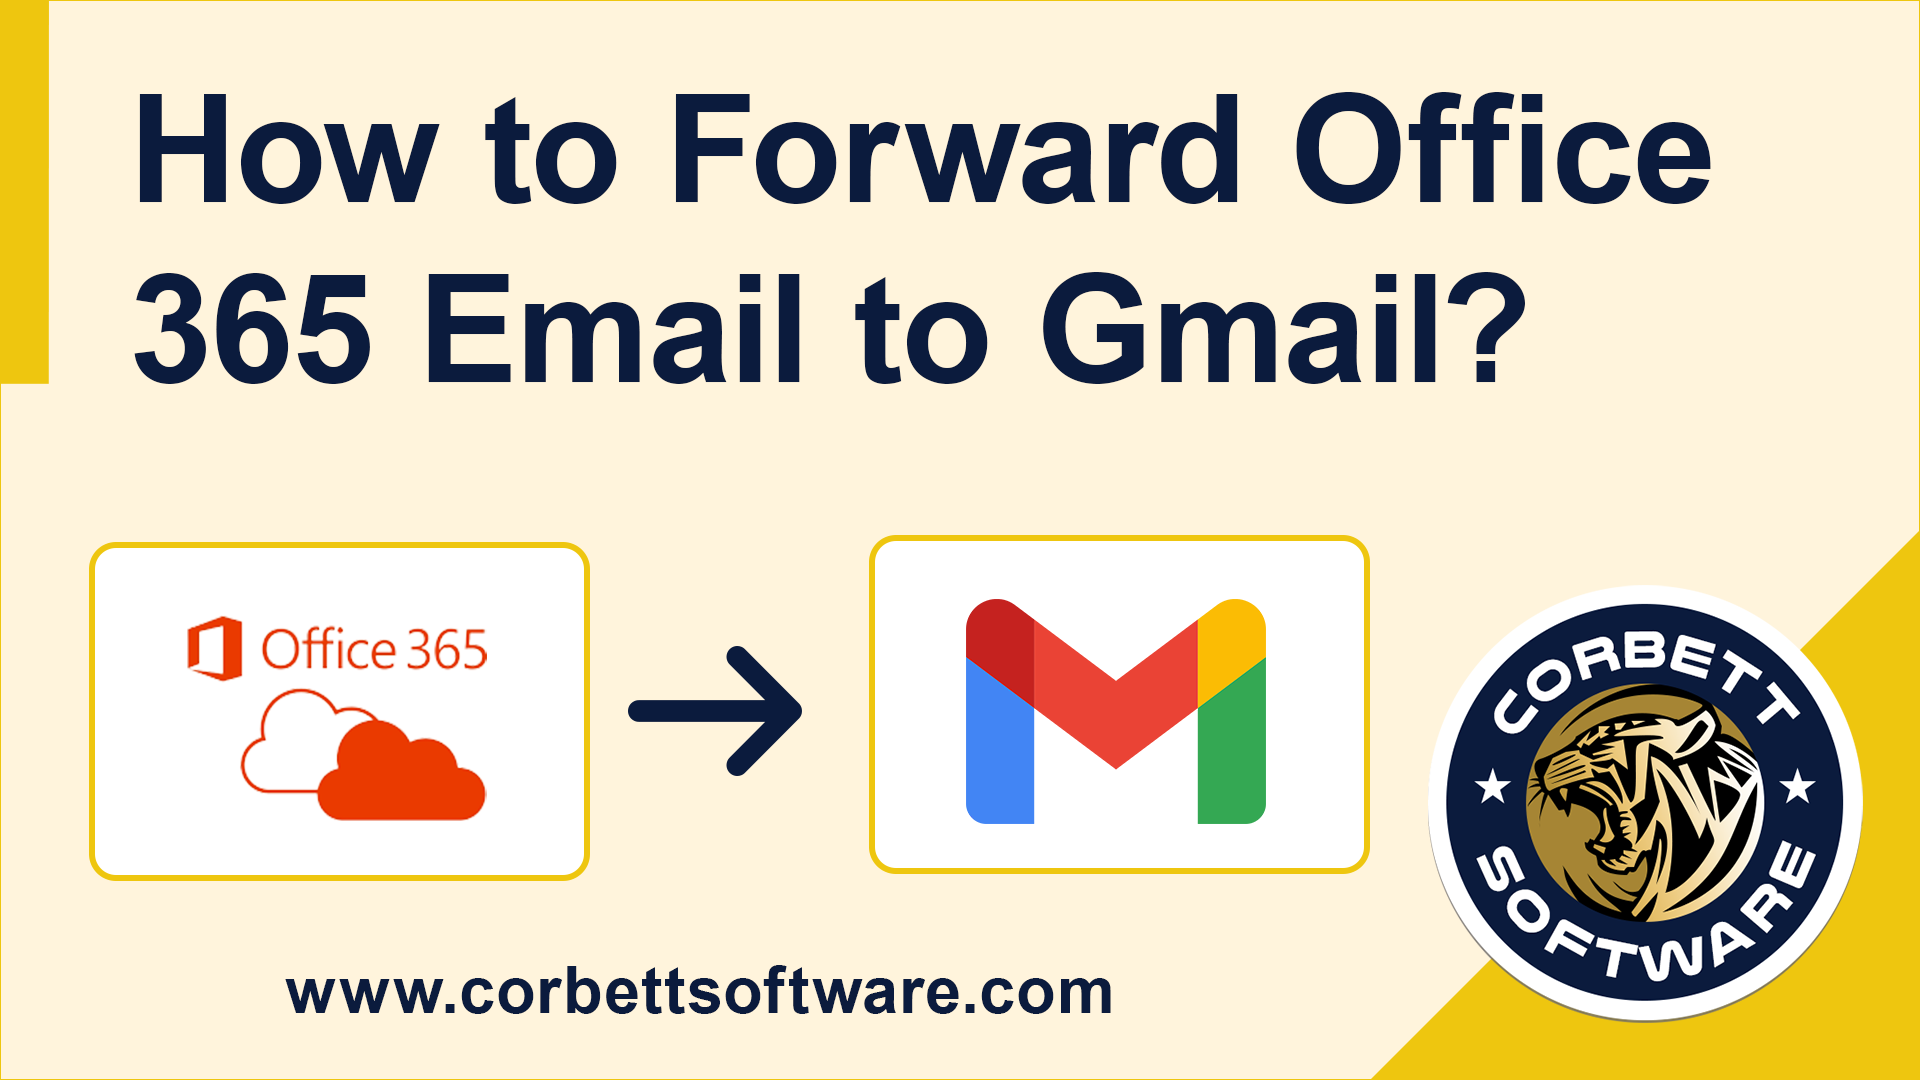 forward office 365 email to Gmail